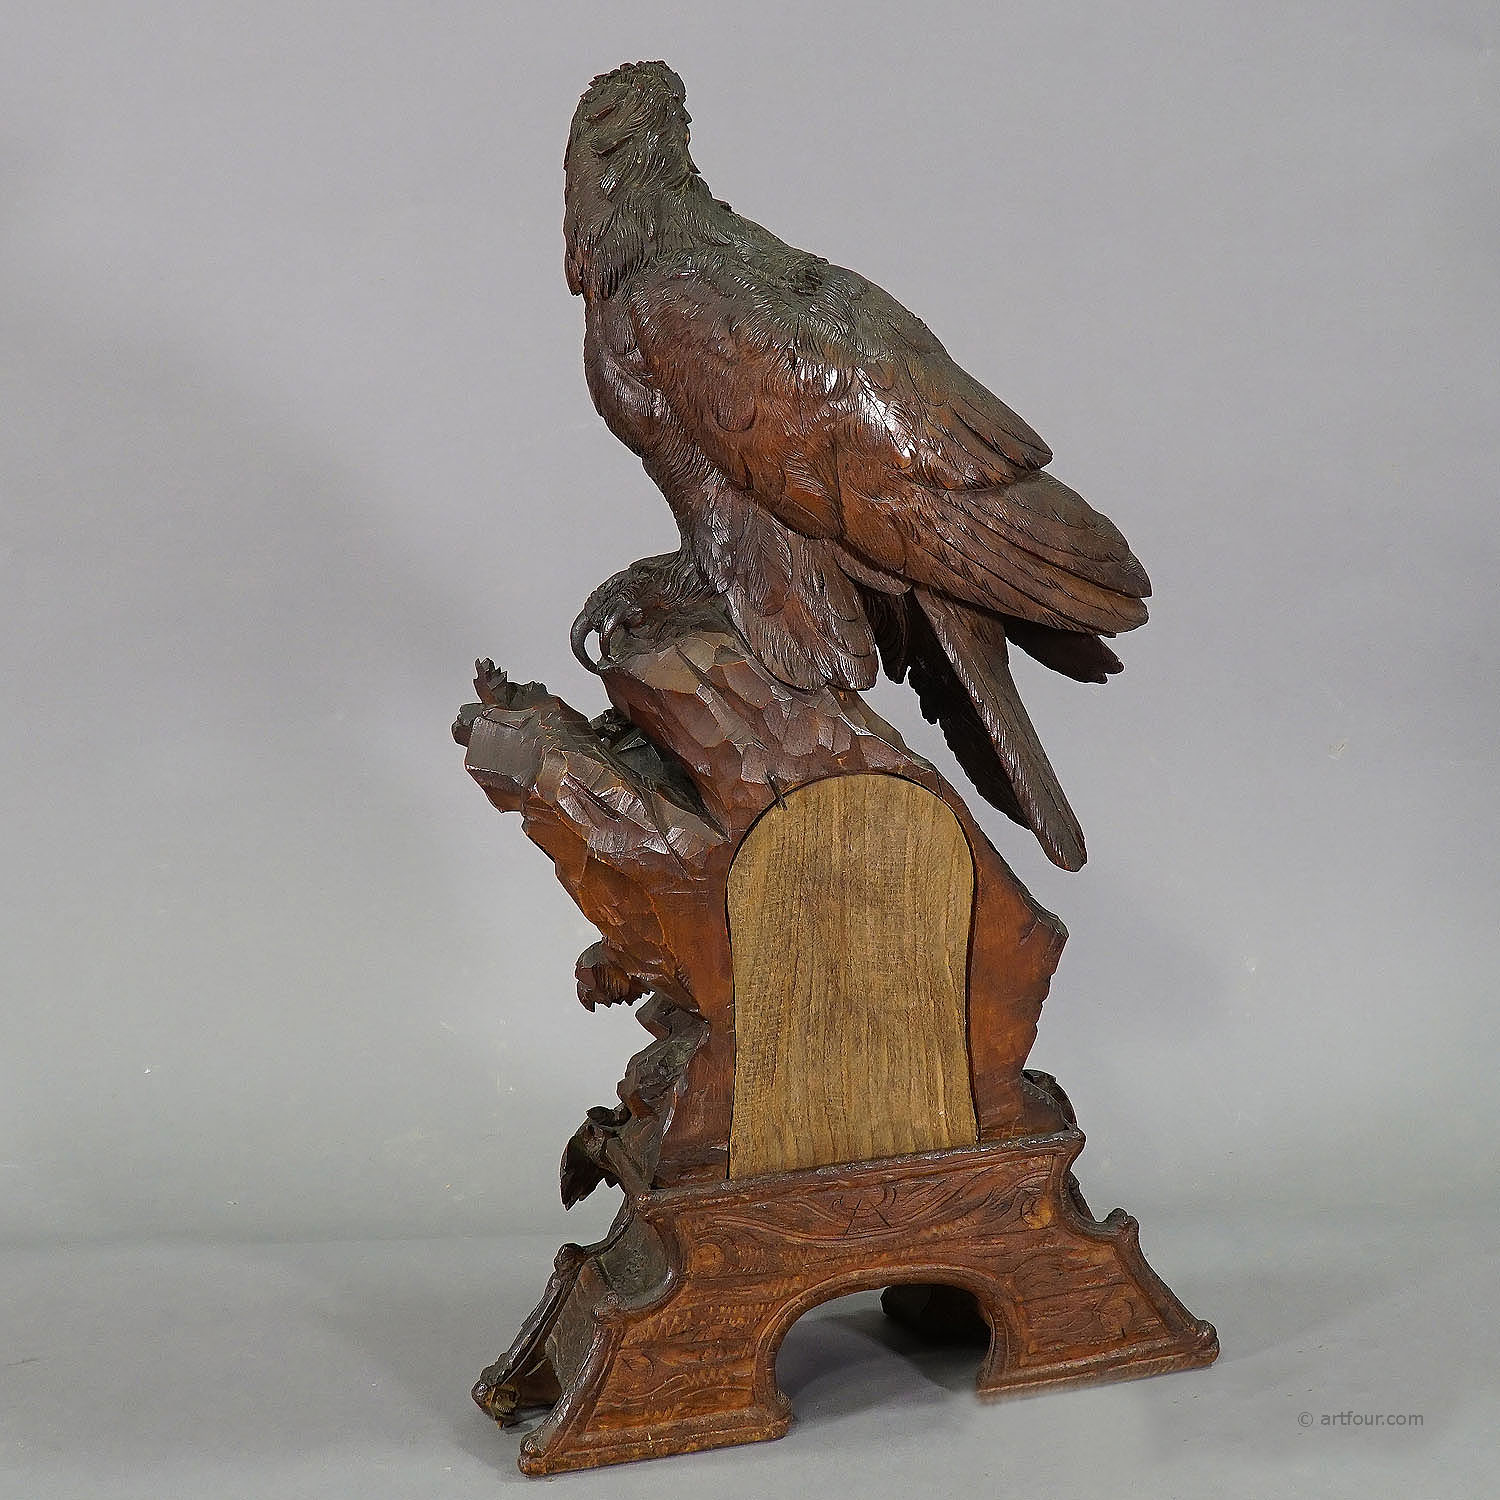 Antique Wooden Mantel Clock with Eagle, Swiss 1900